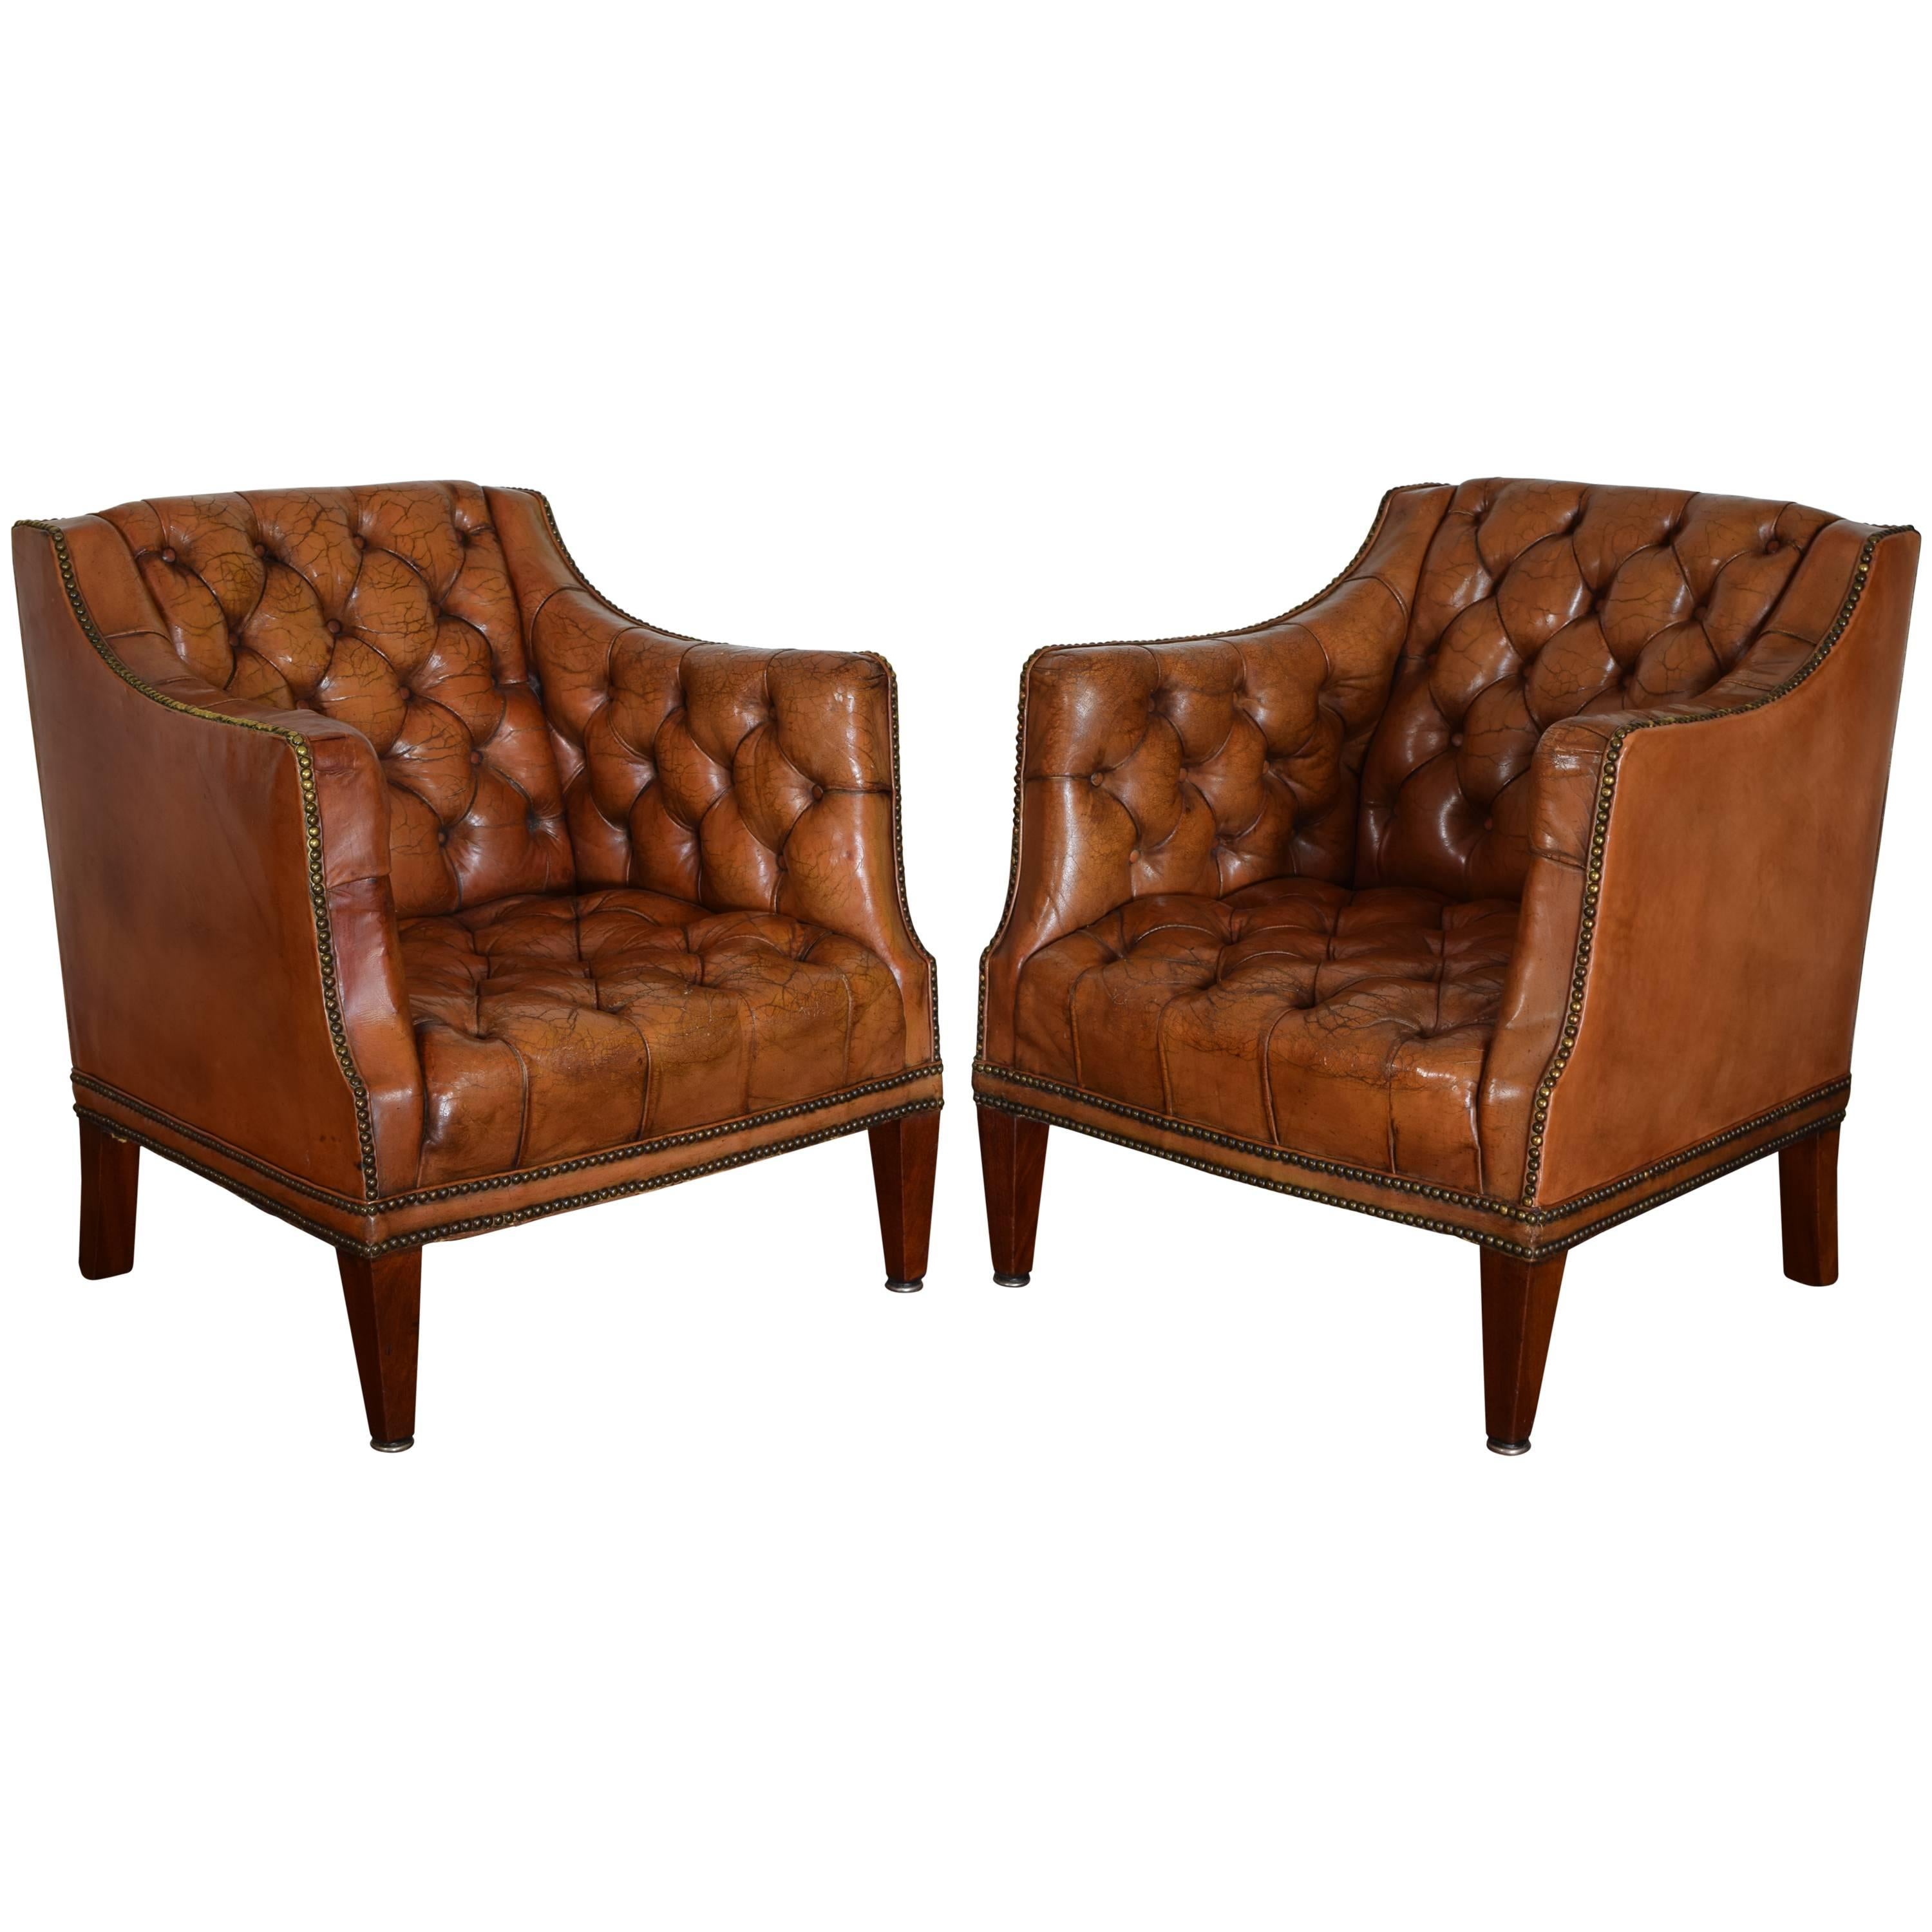 Pair of French Mahogany and Tufted Leather Upholstered Bergeres